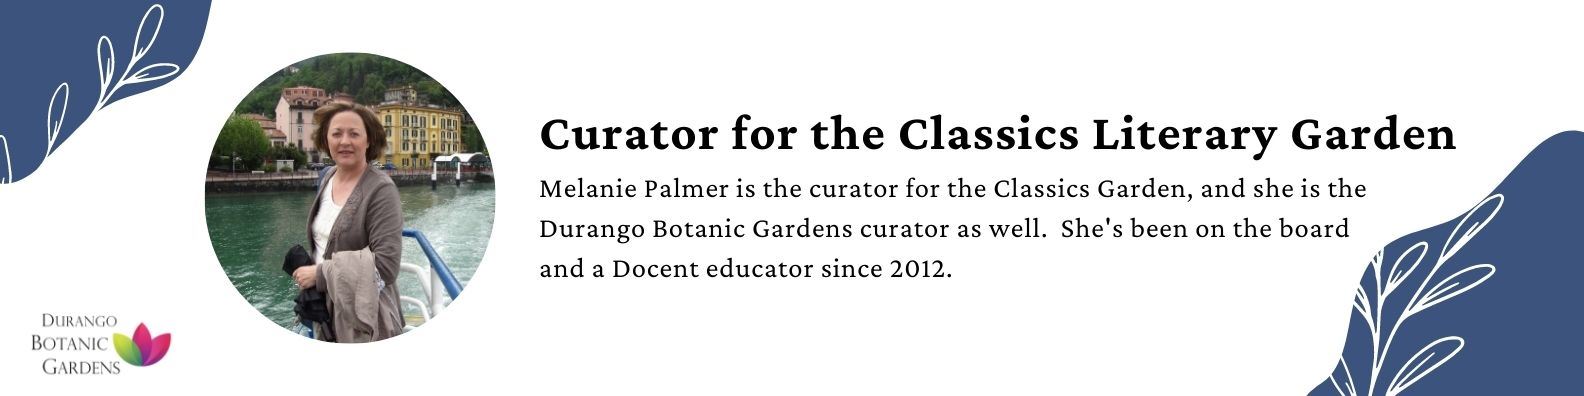 Melanie Palmer is the curator for the Classics Garden.